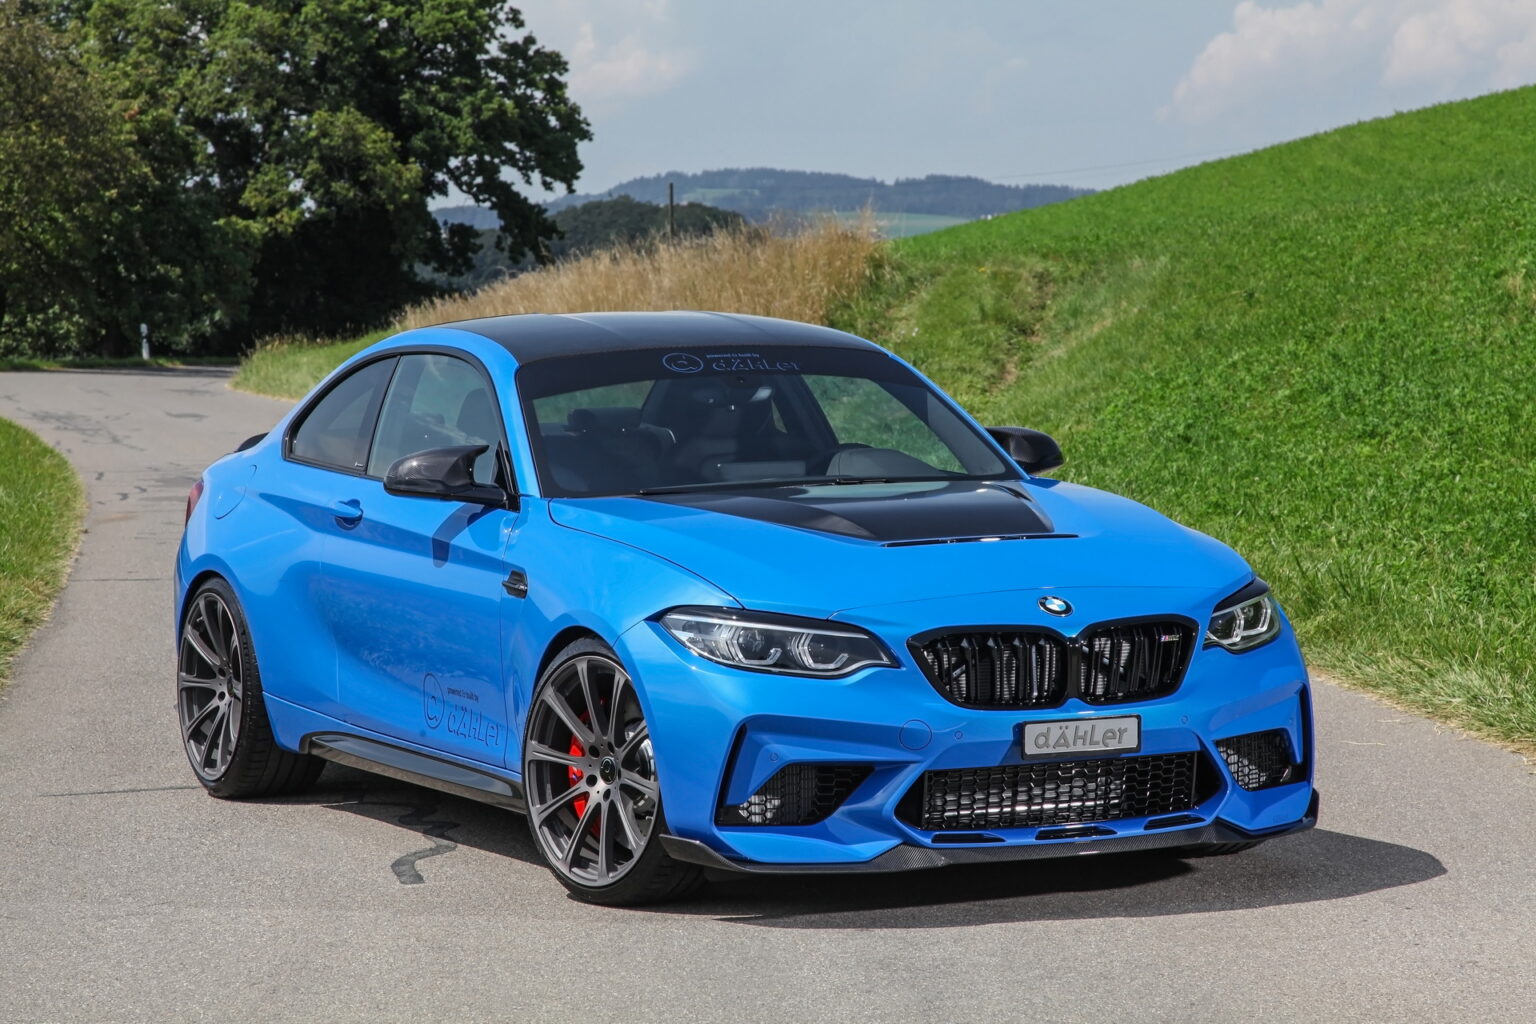 Dahler tuned this BMW M2 CS to over 500 HP - BMW.SG